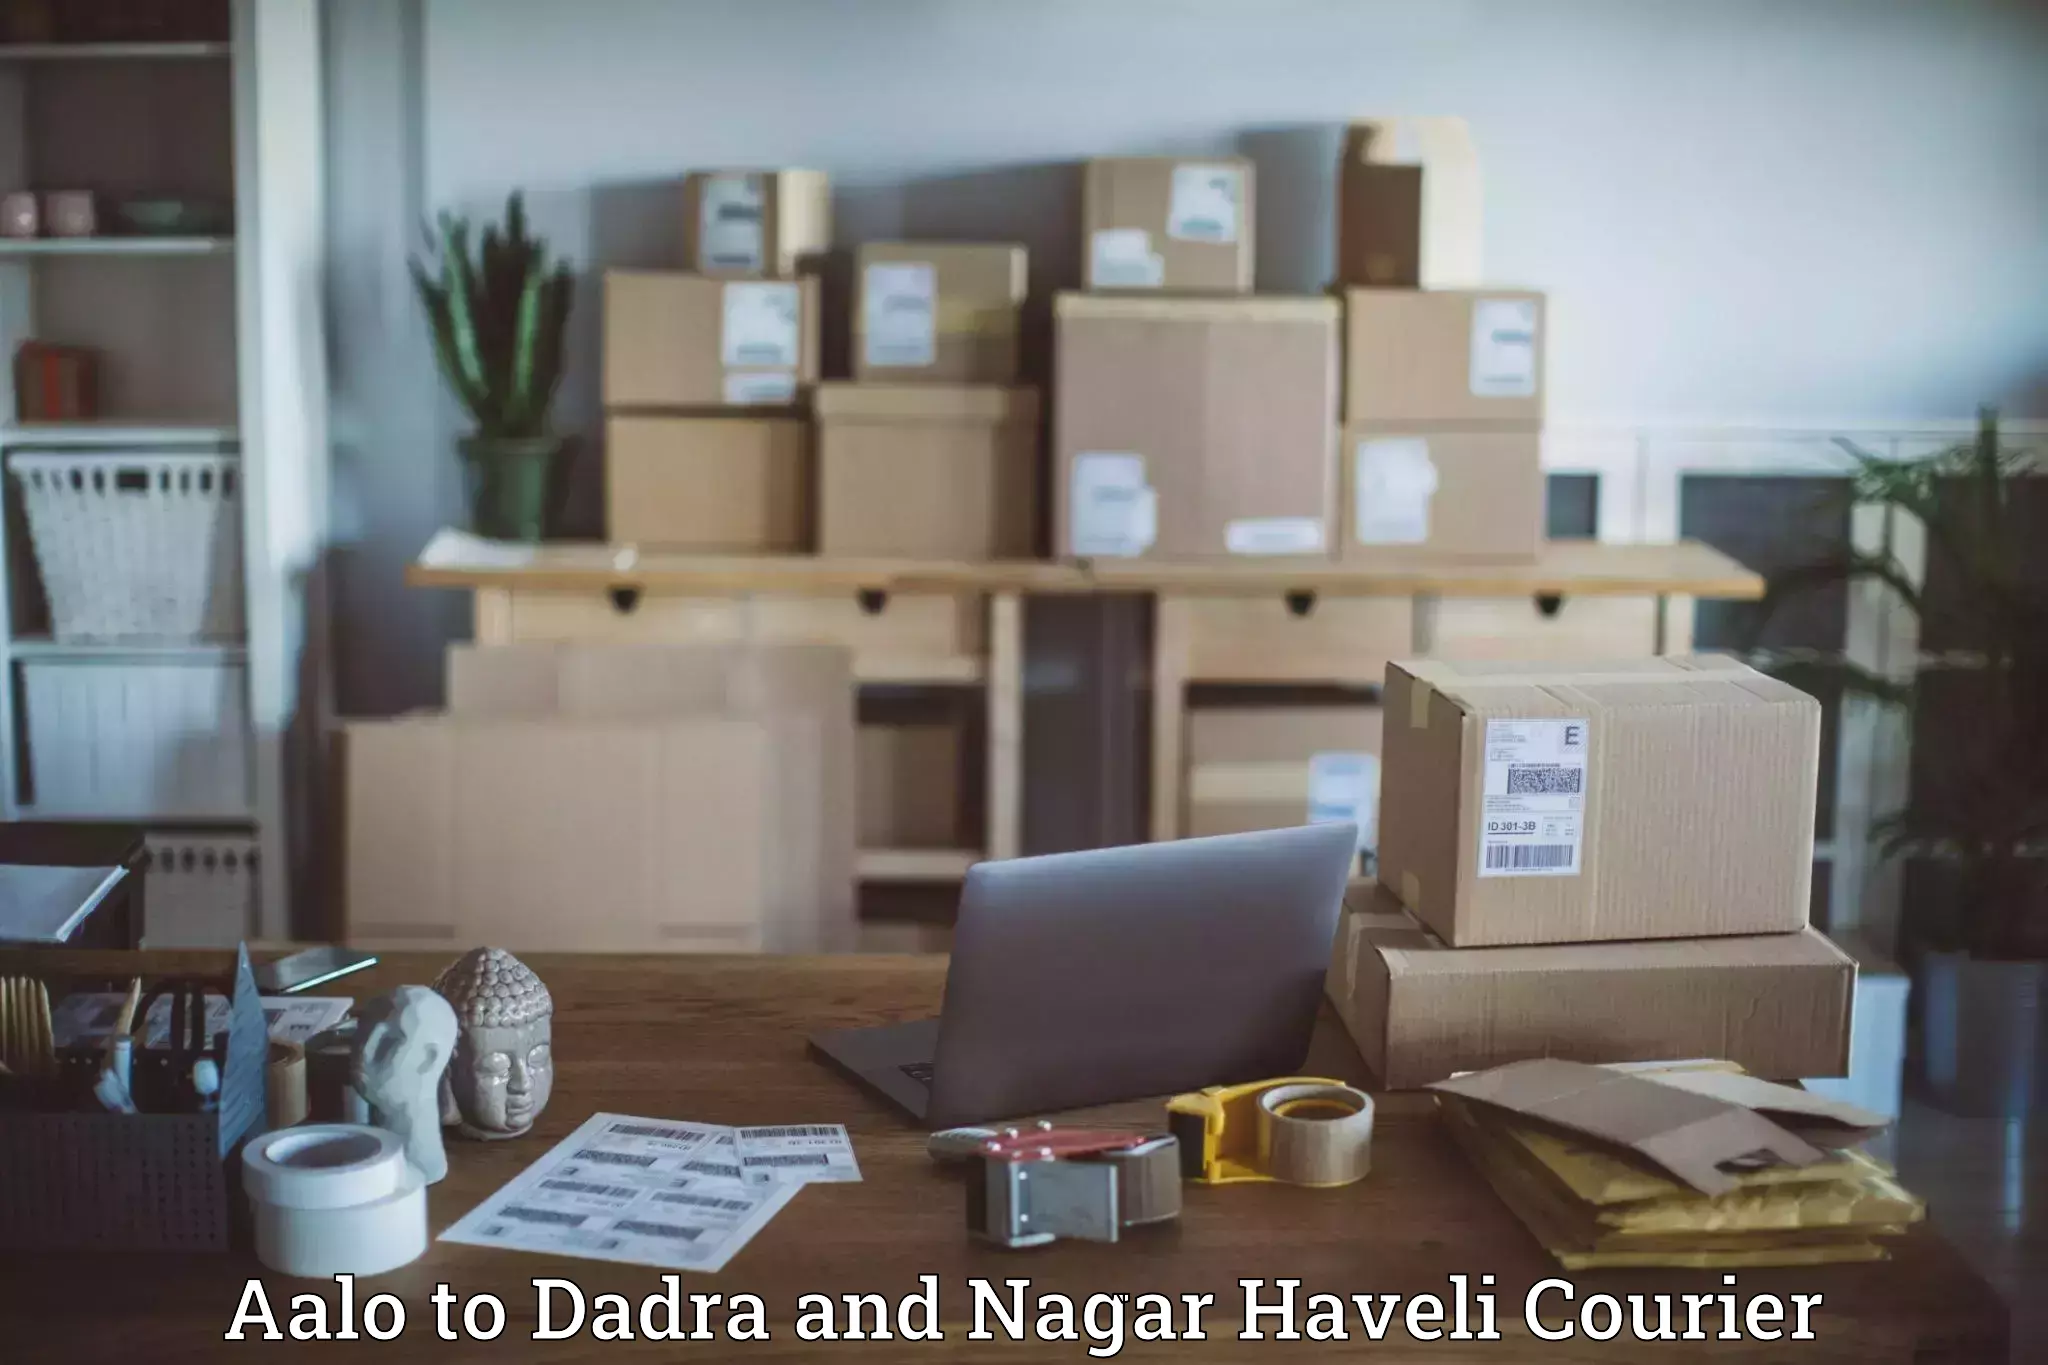 Small parcel delivery in Aalo to Dadra and Nagar Haveli